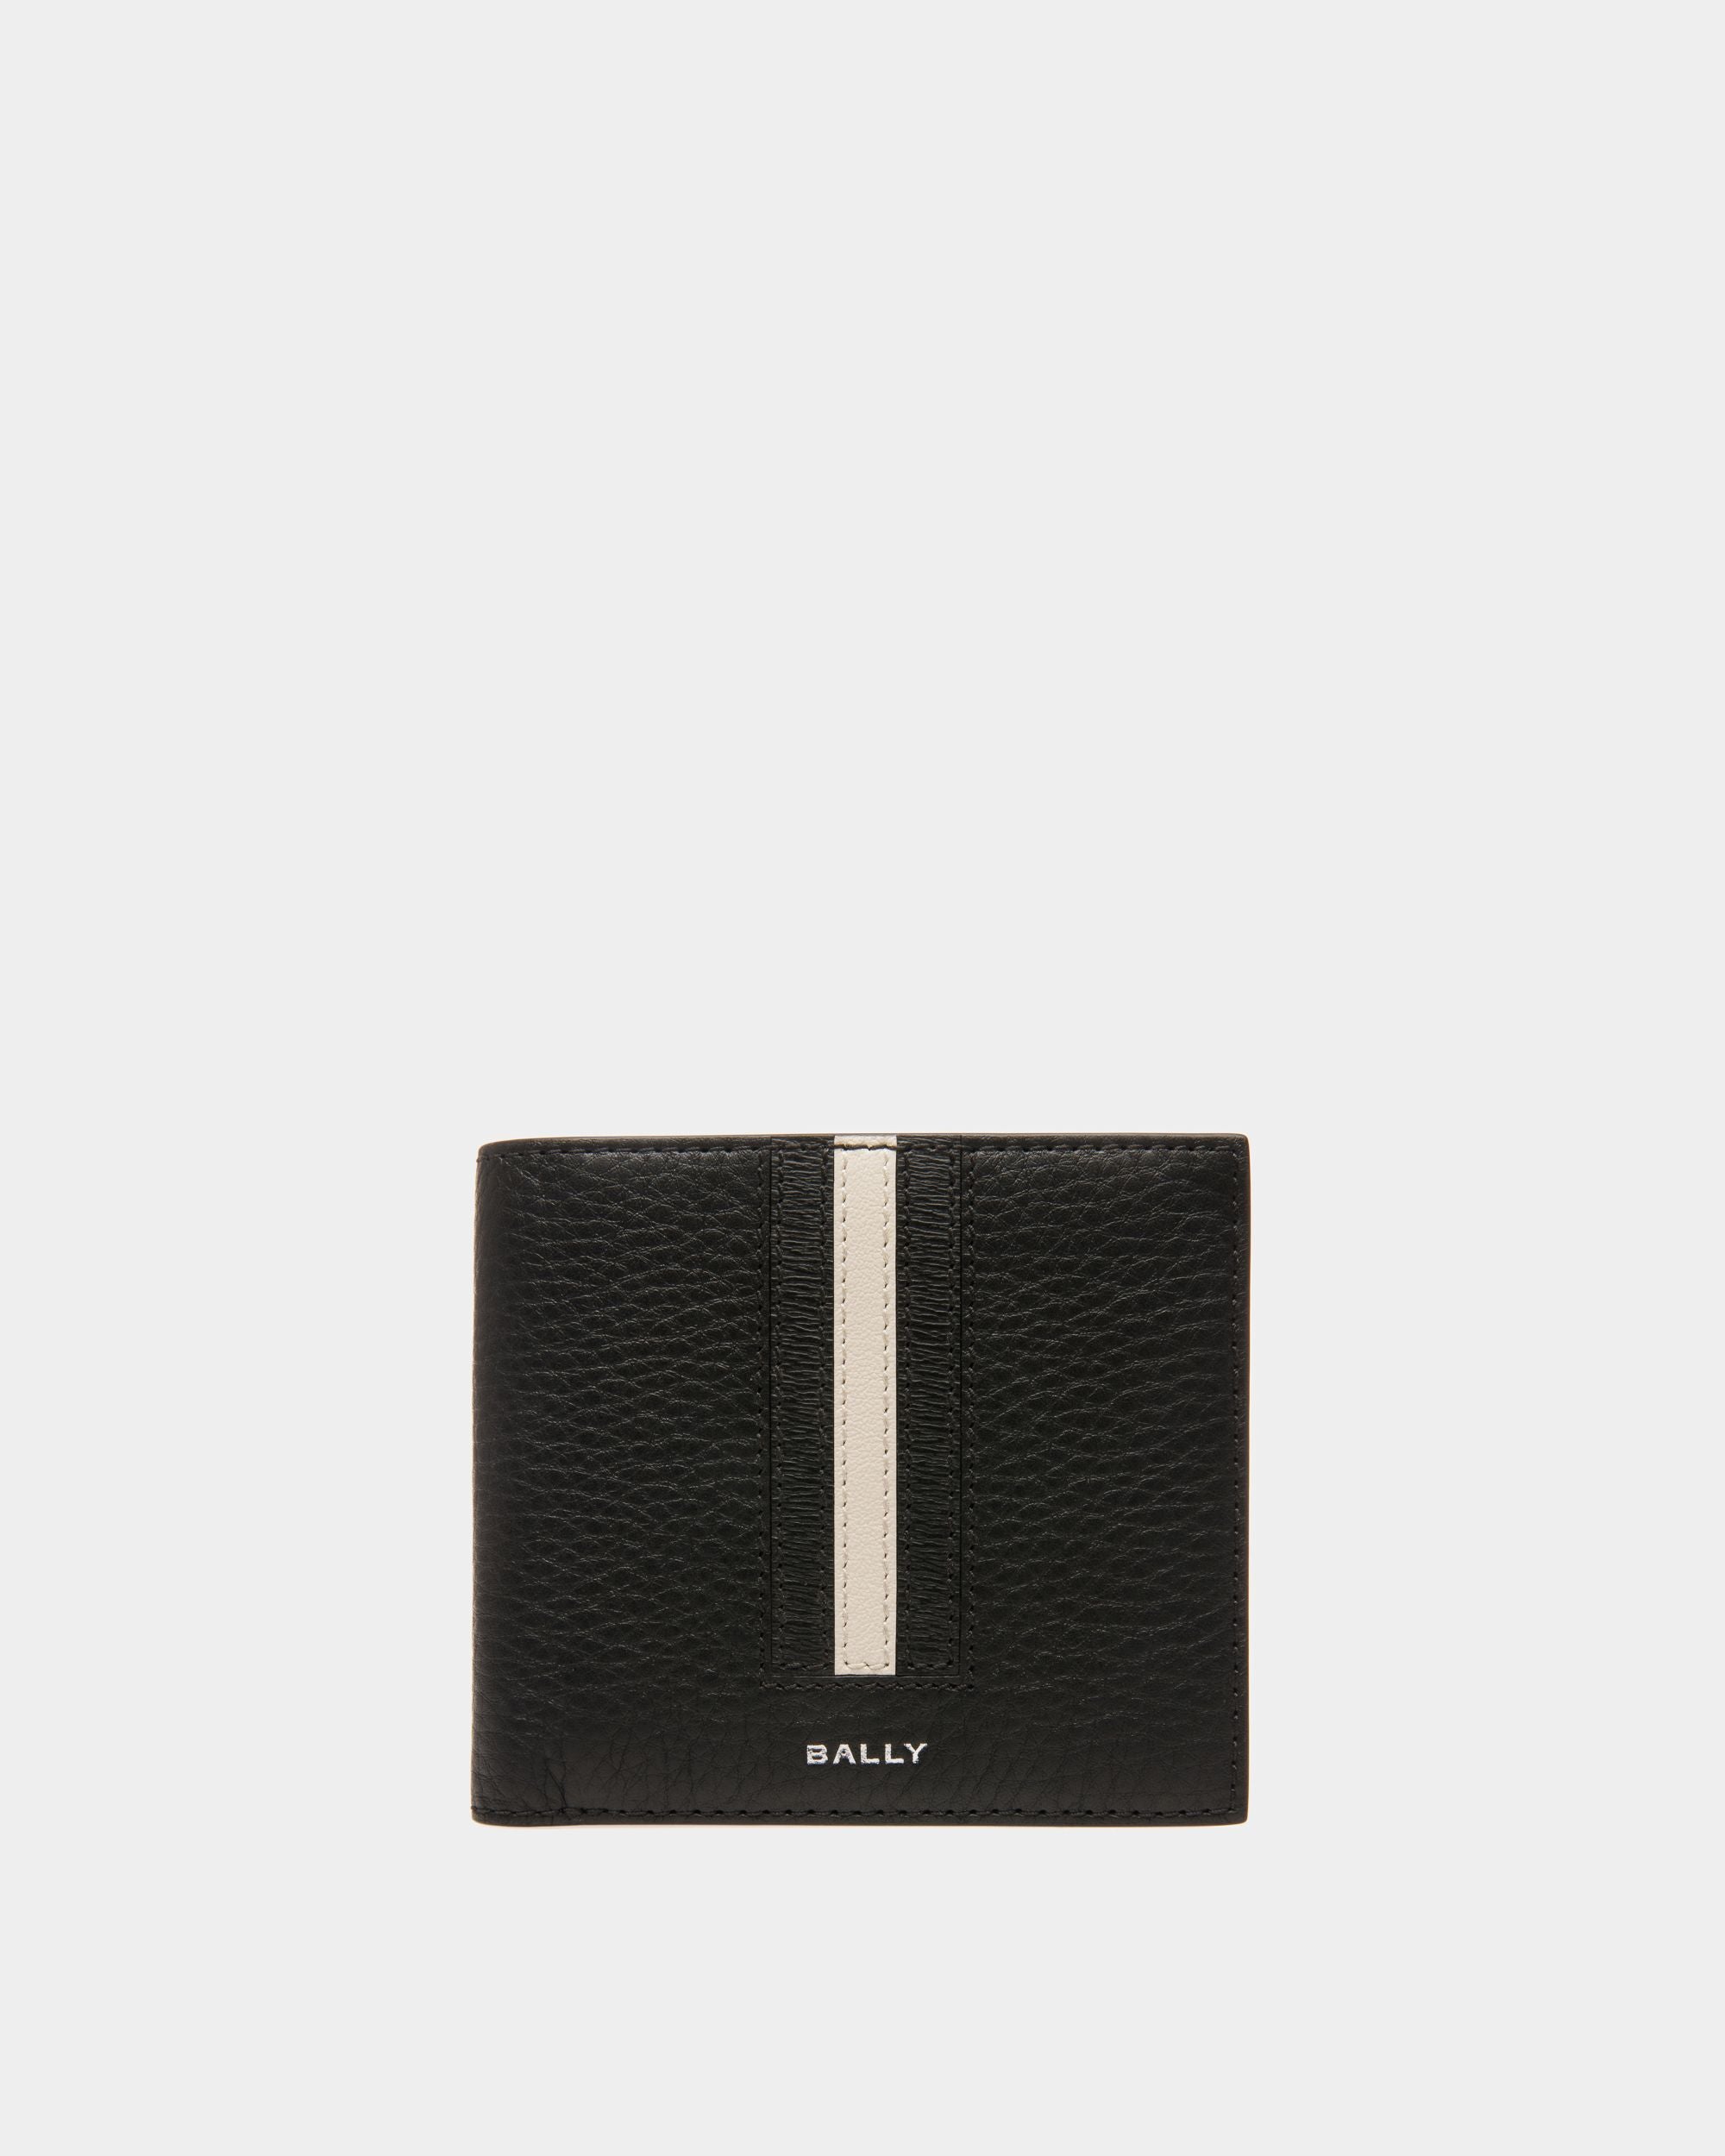 Ribbon | Men's Wallets And Coin Purses | Black Leather | Bally | Still Life Front